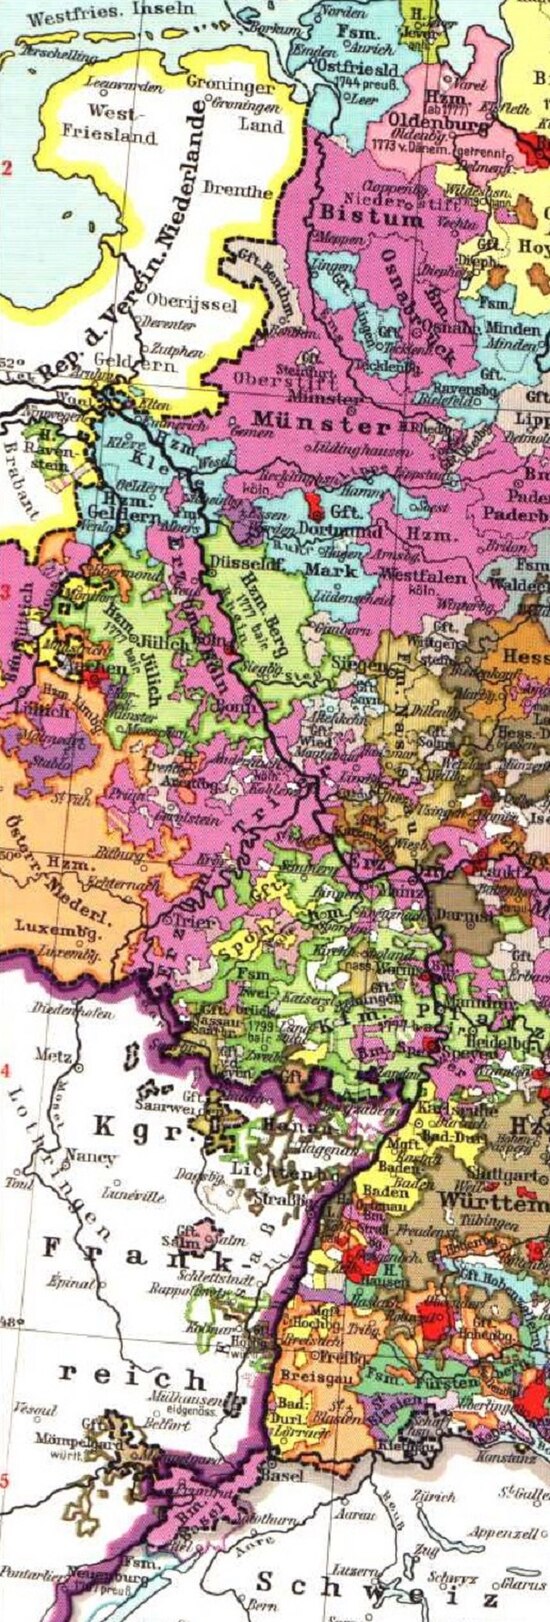 The Rhineland in 1789: The annexation of the left bank of the Rhine by the French Republic set in motion the mediatisation process